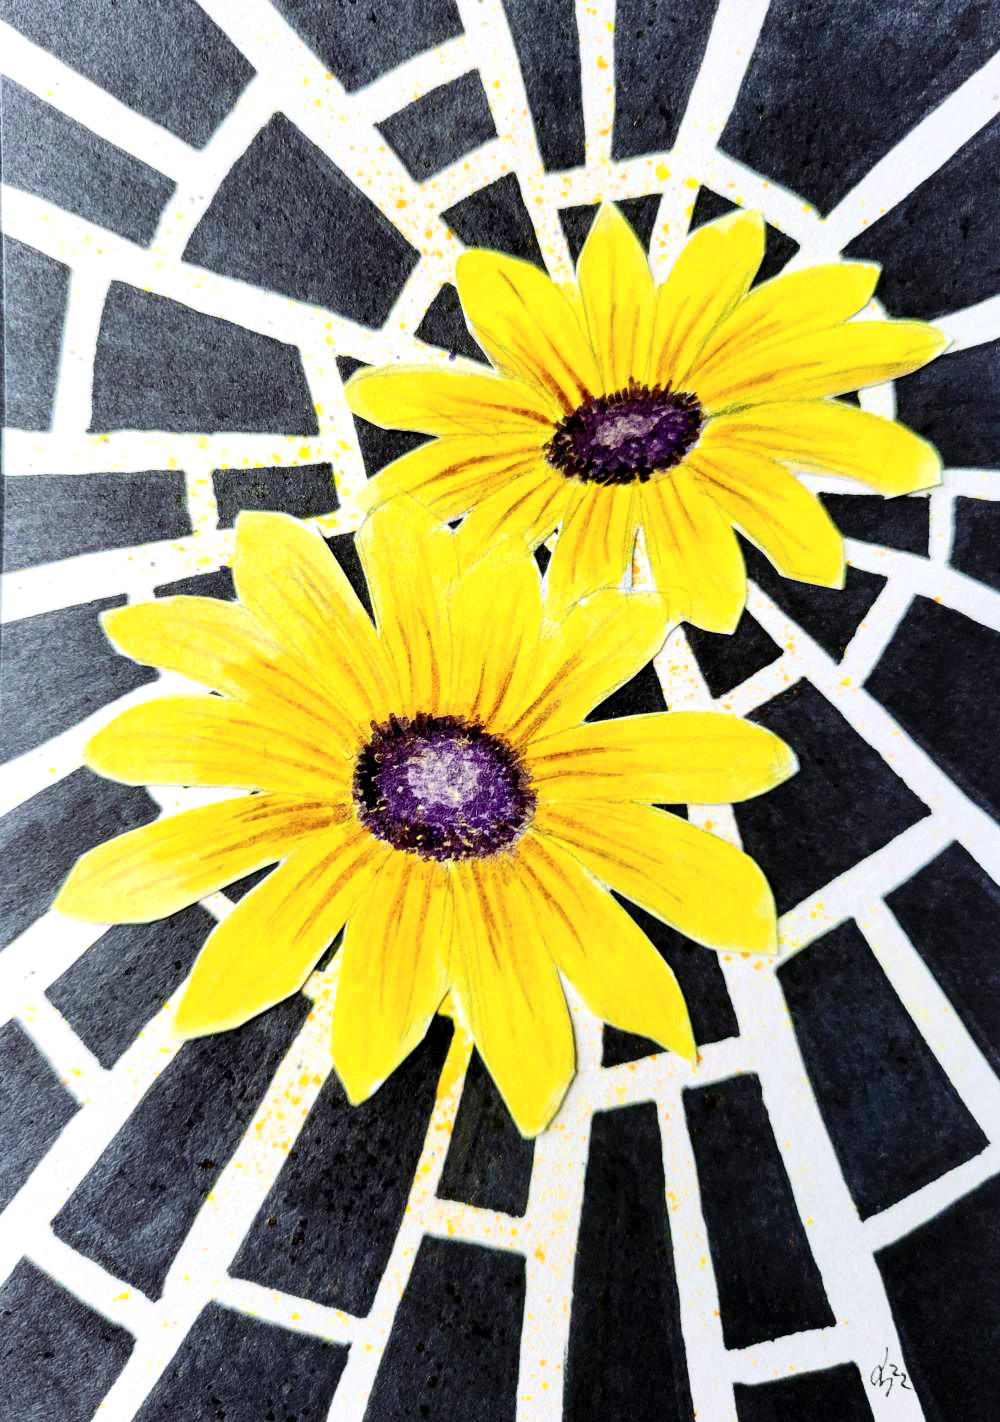 A painting of a yellow flower on a shattered background